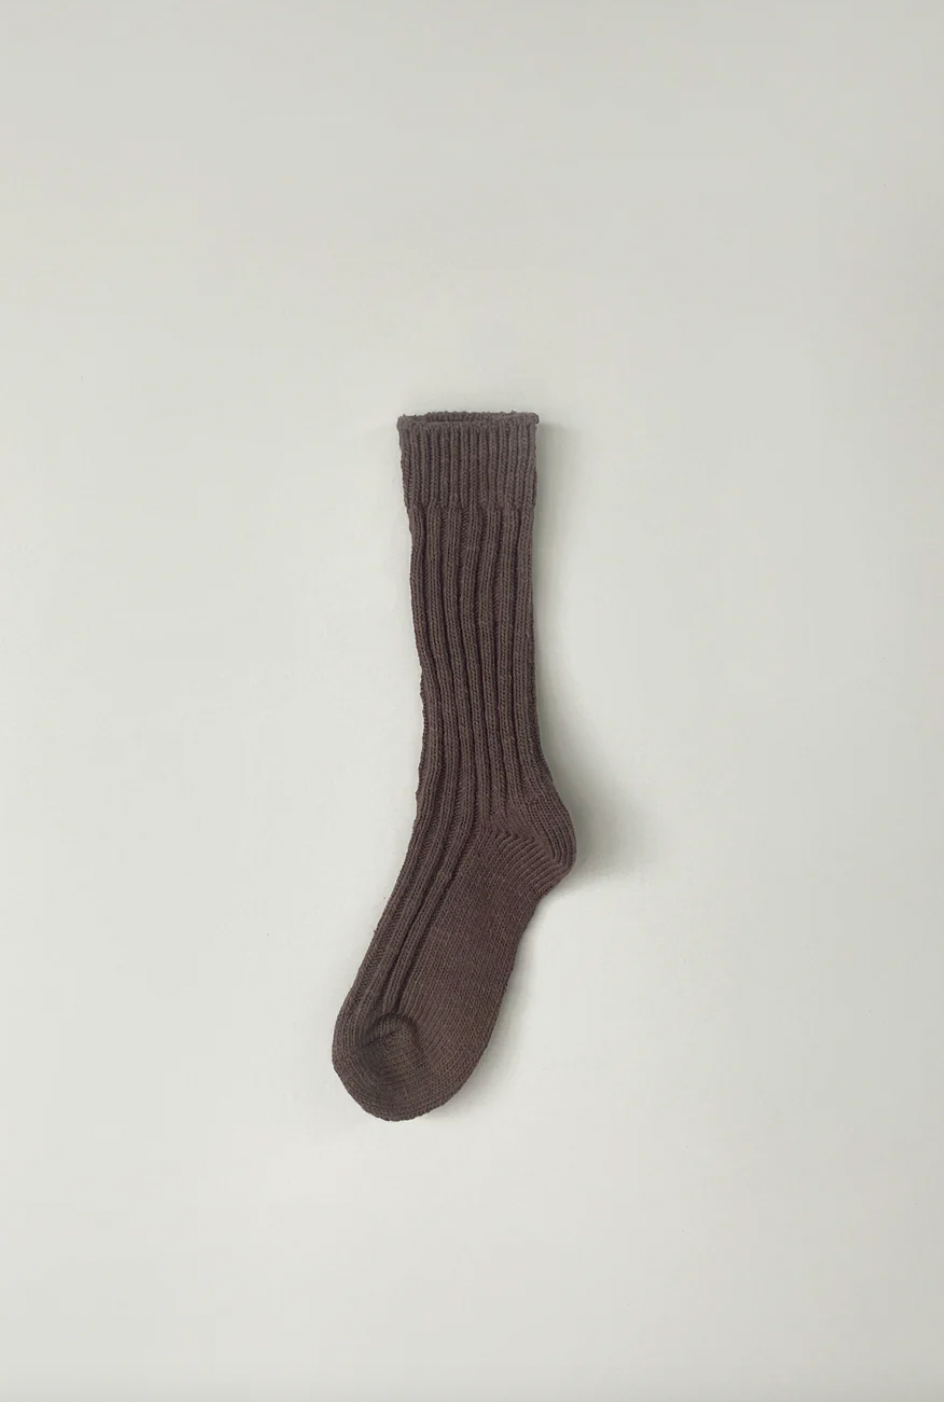 Product Image for The Woven Sock, Clove